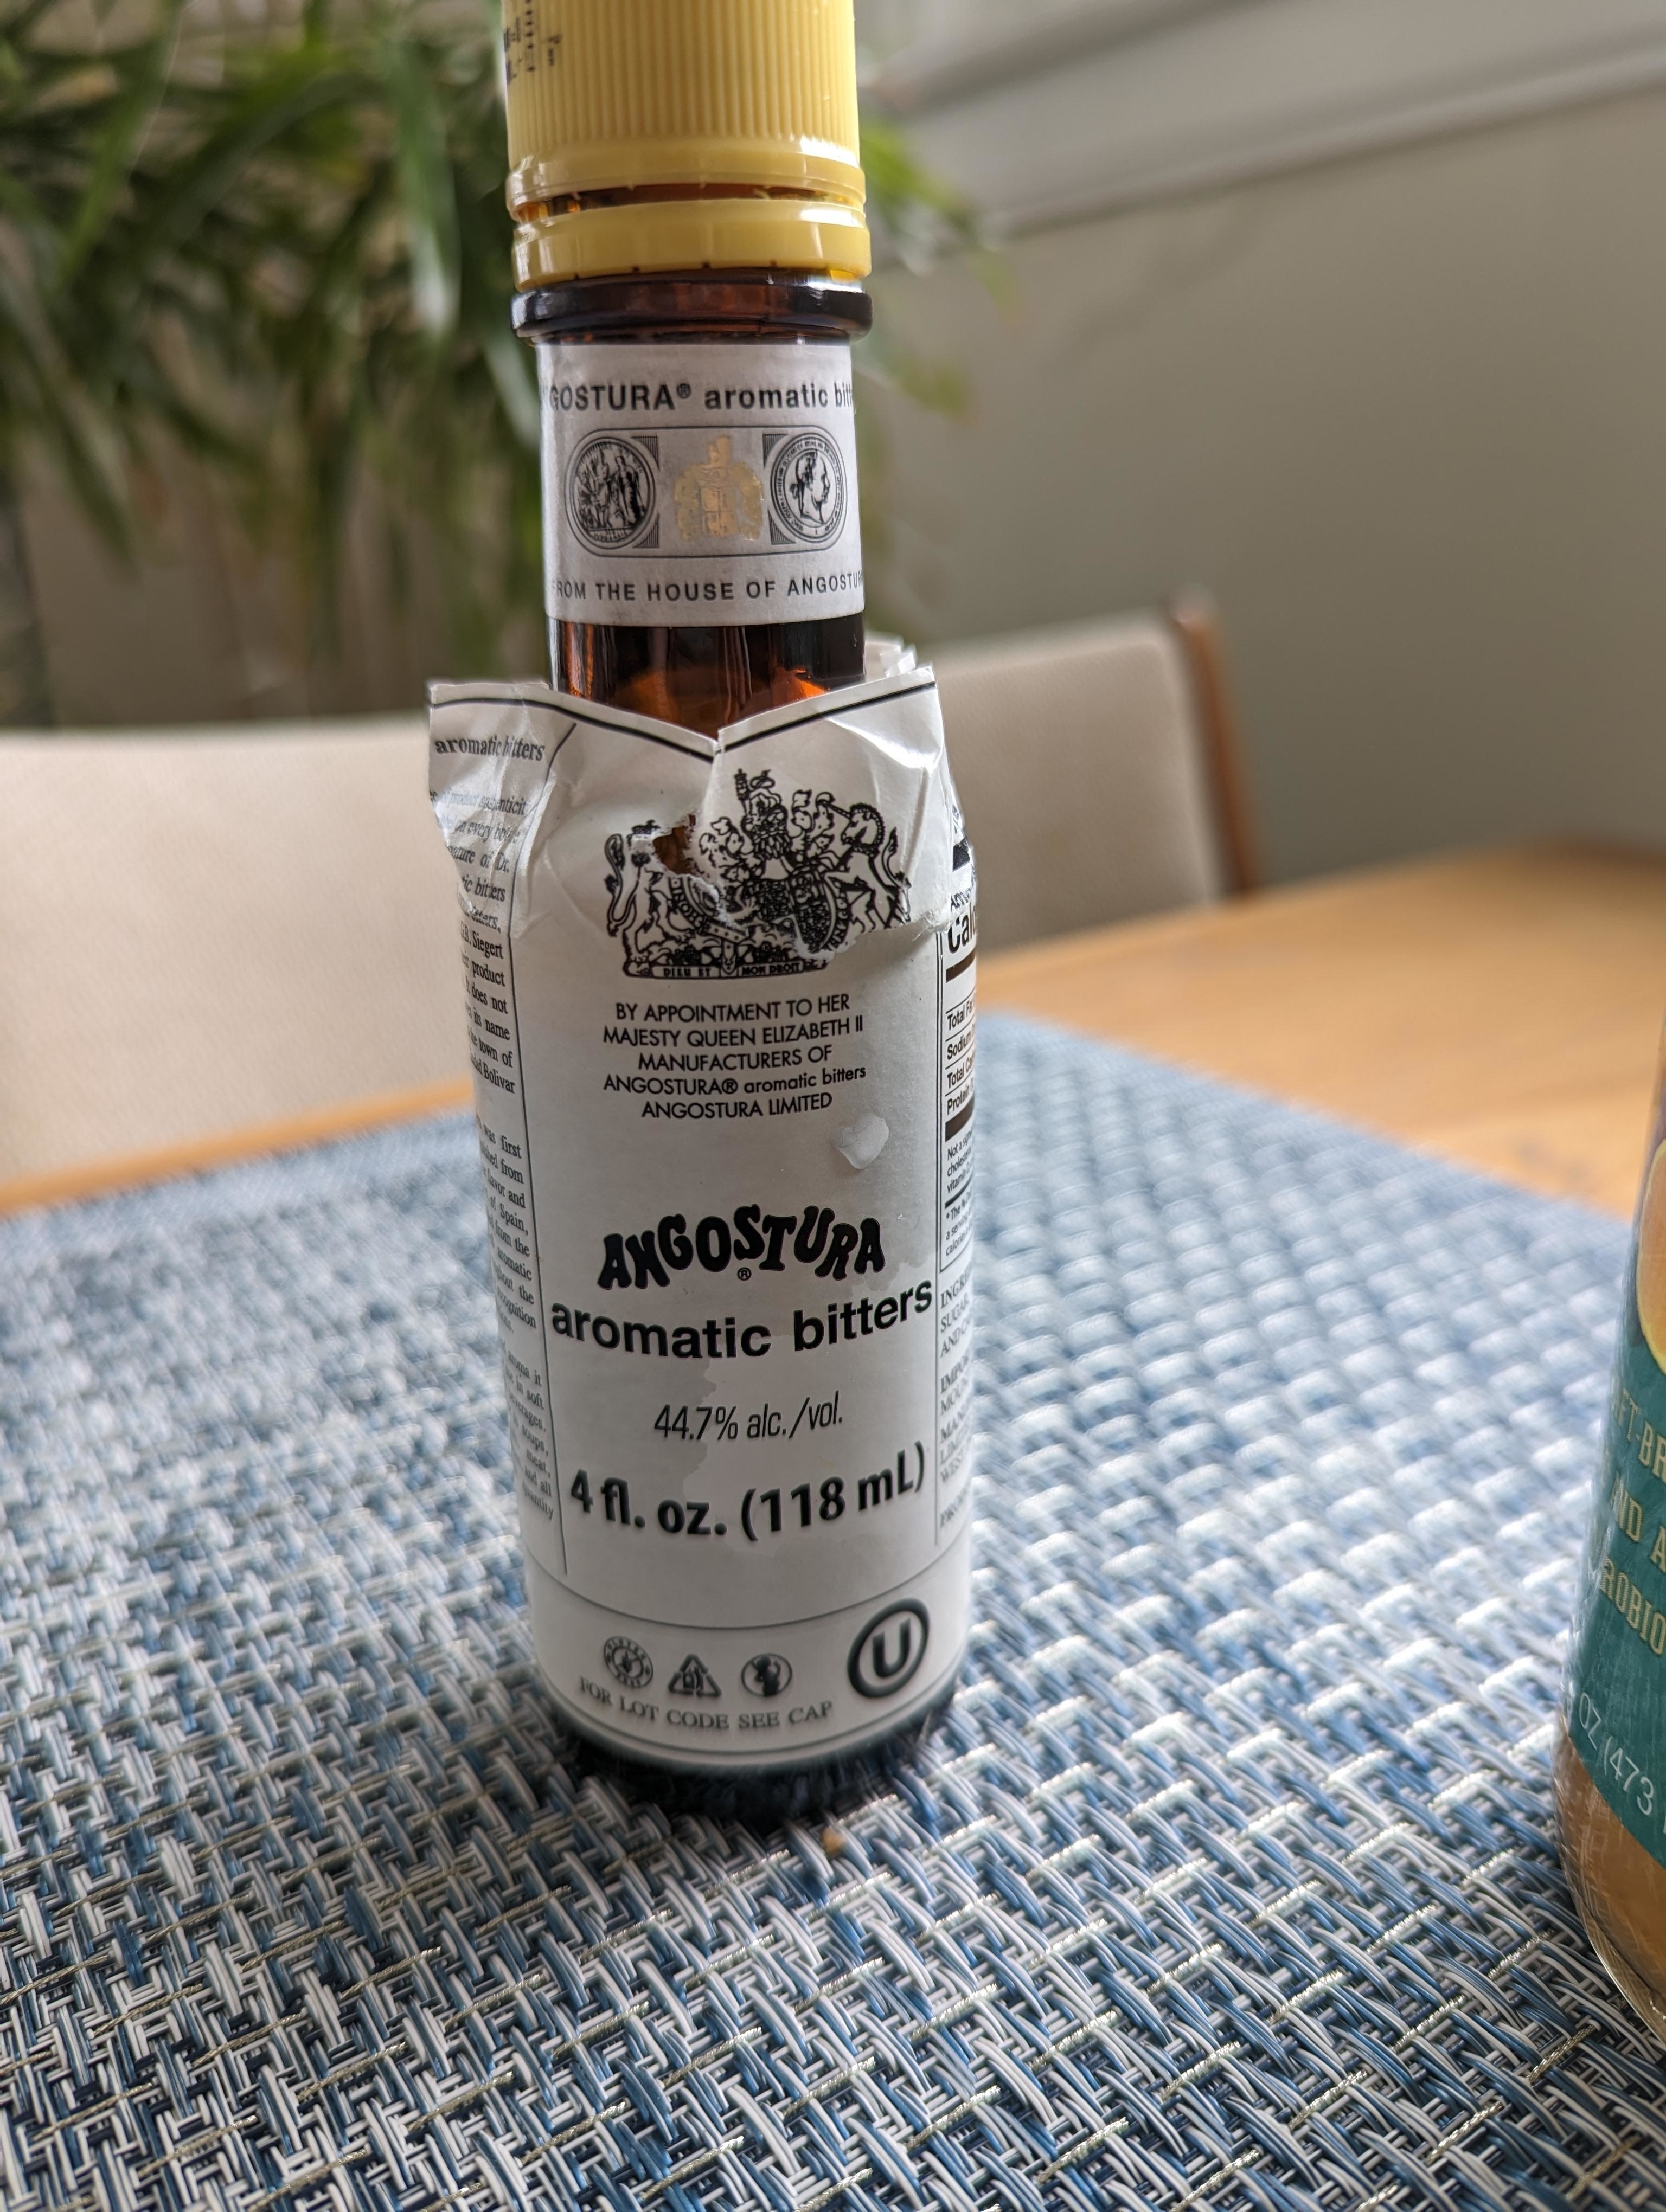 Bottle of Angostura aromatic bitters on a table